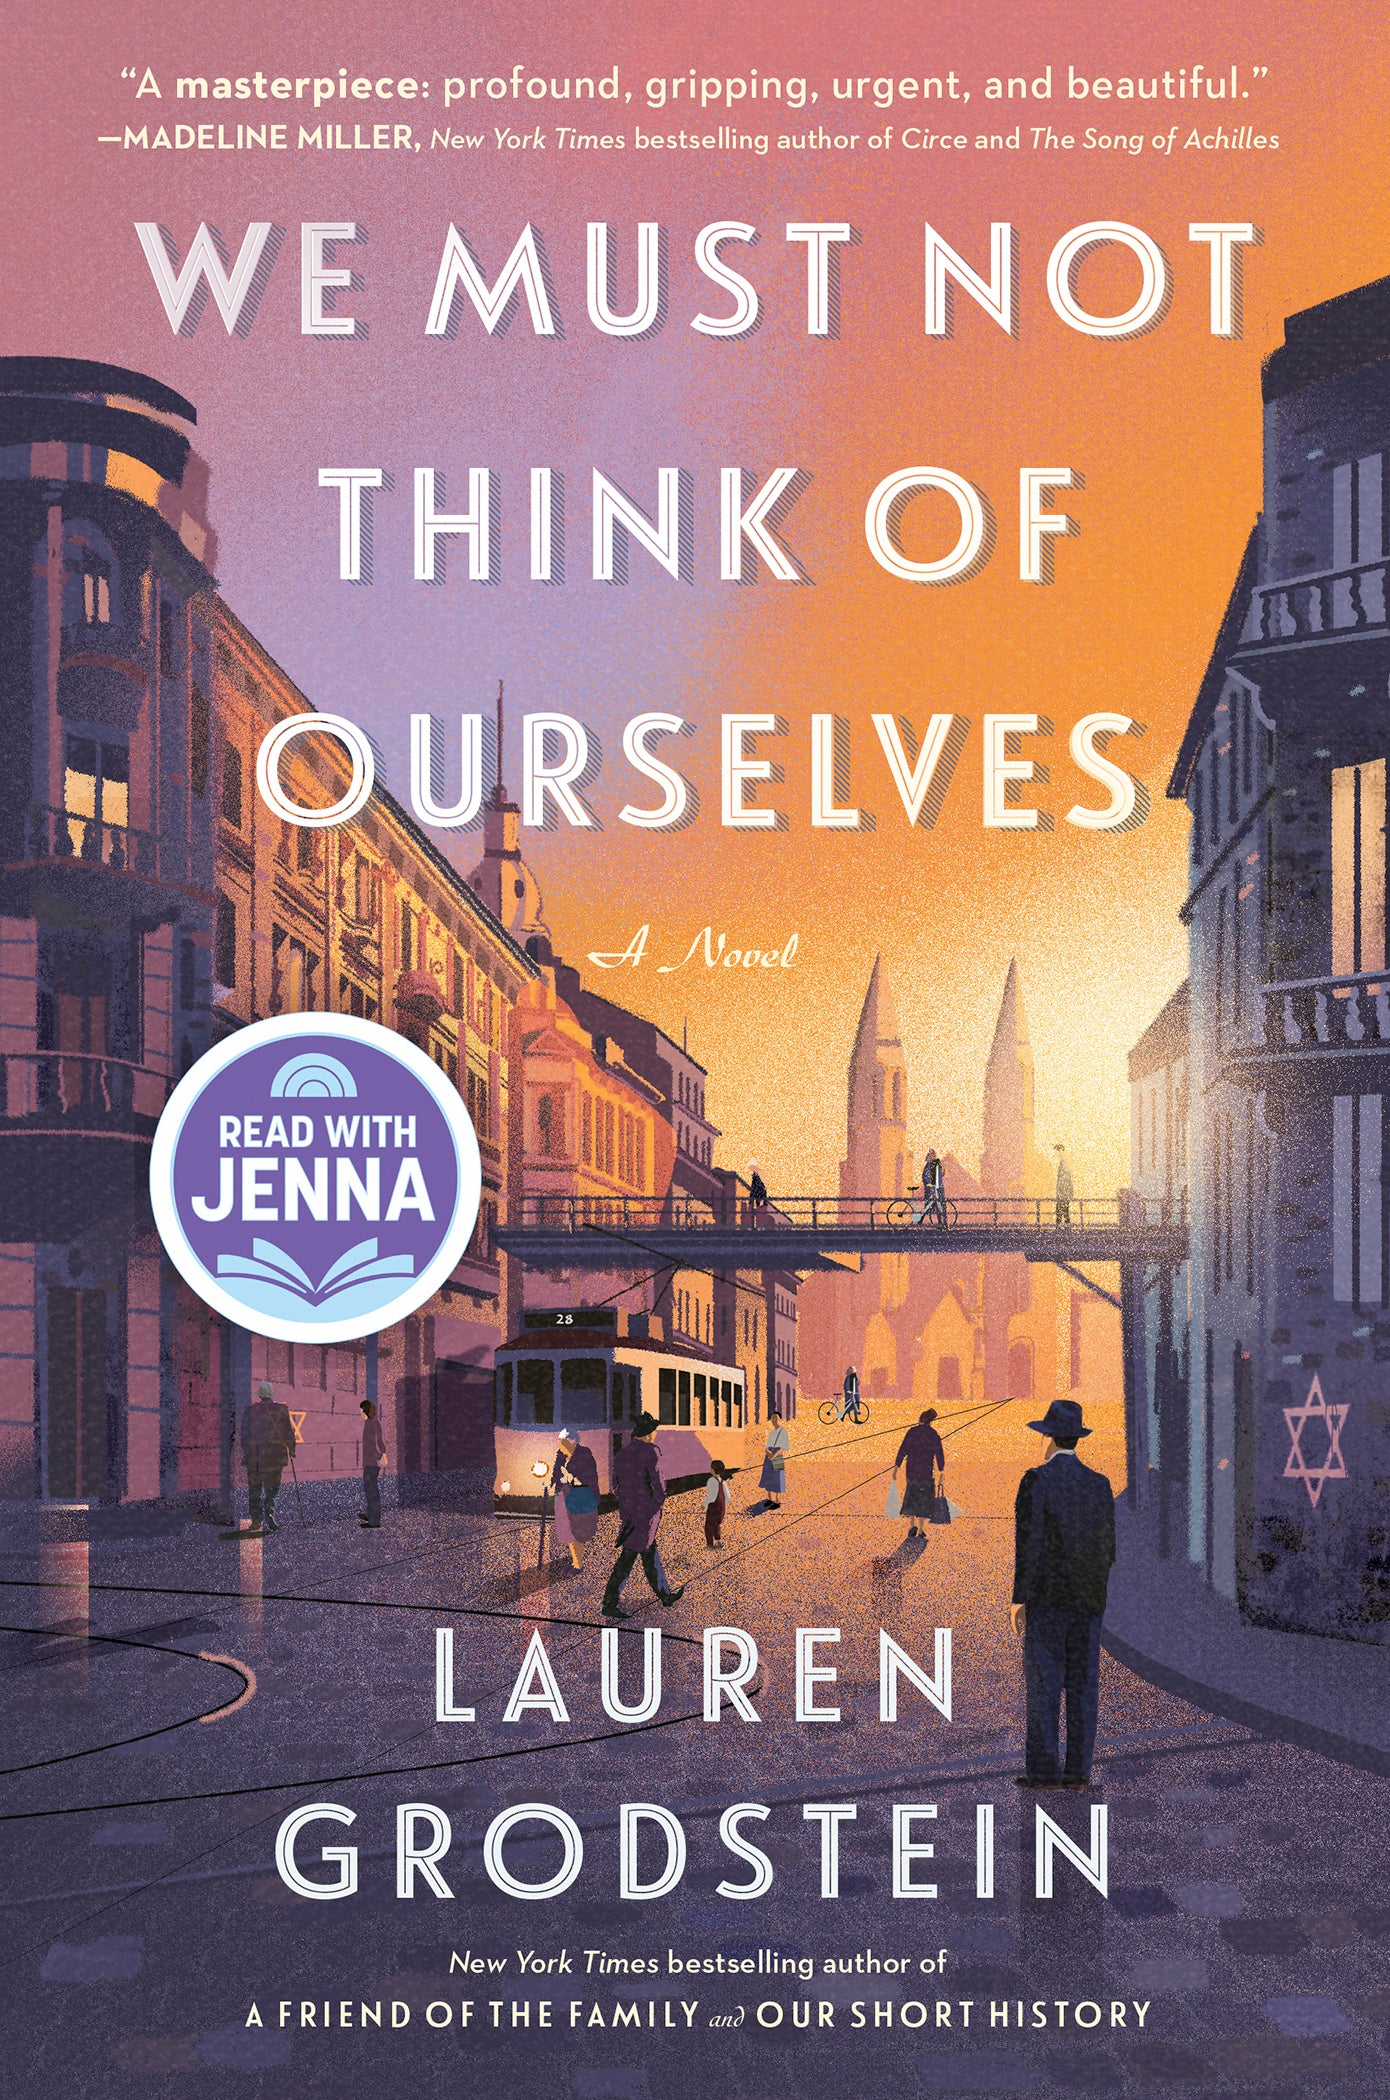 Book Review - We Must Not Think of Ourselves